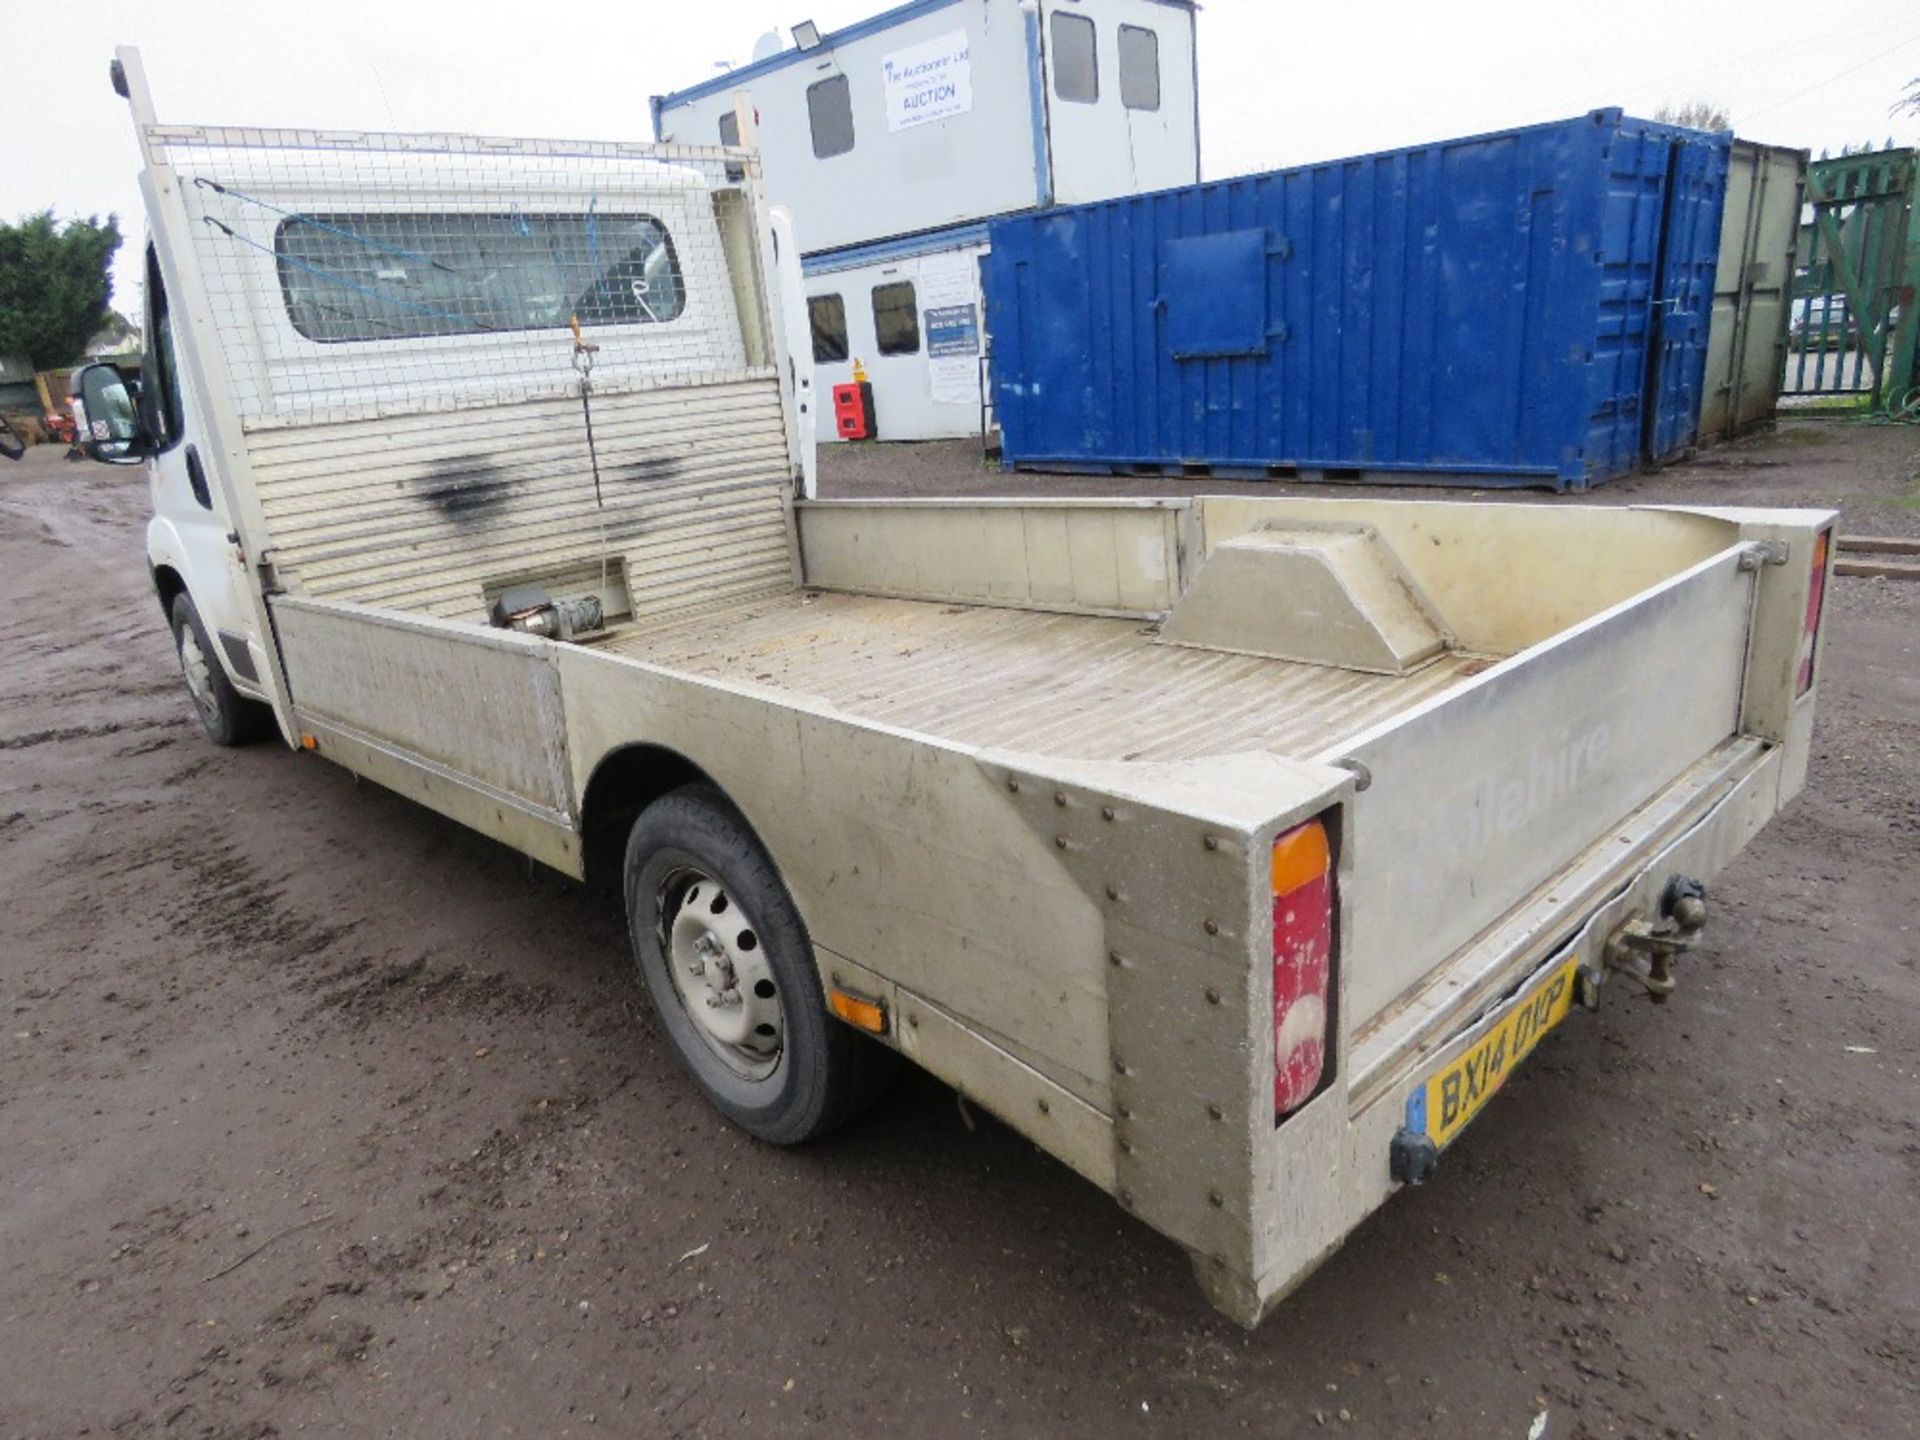 CITROEN LOW BED PLANT TRUCK, REG:BX14 OVP. 3500KG RATED WITH RAMPS. 125,870 REC MILES. WITH V5, MOT - Image 7 of 13